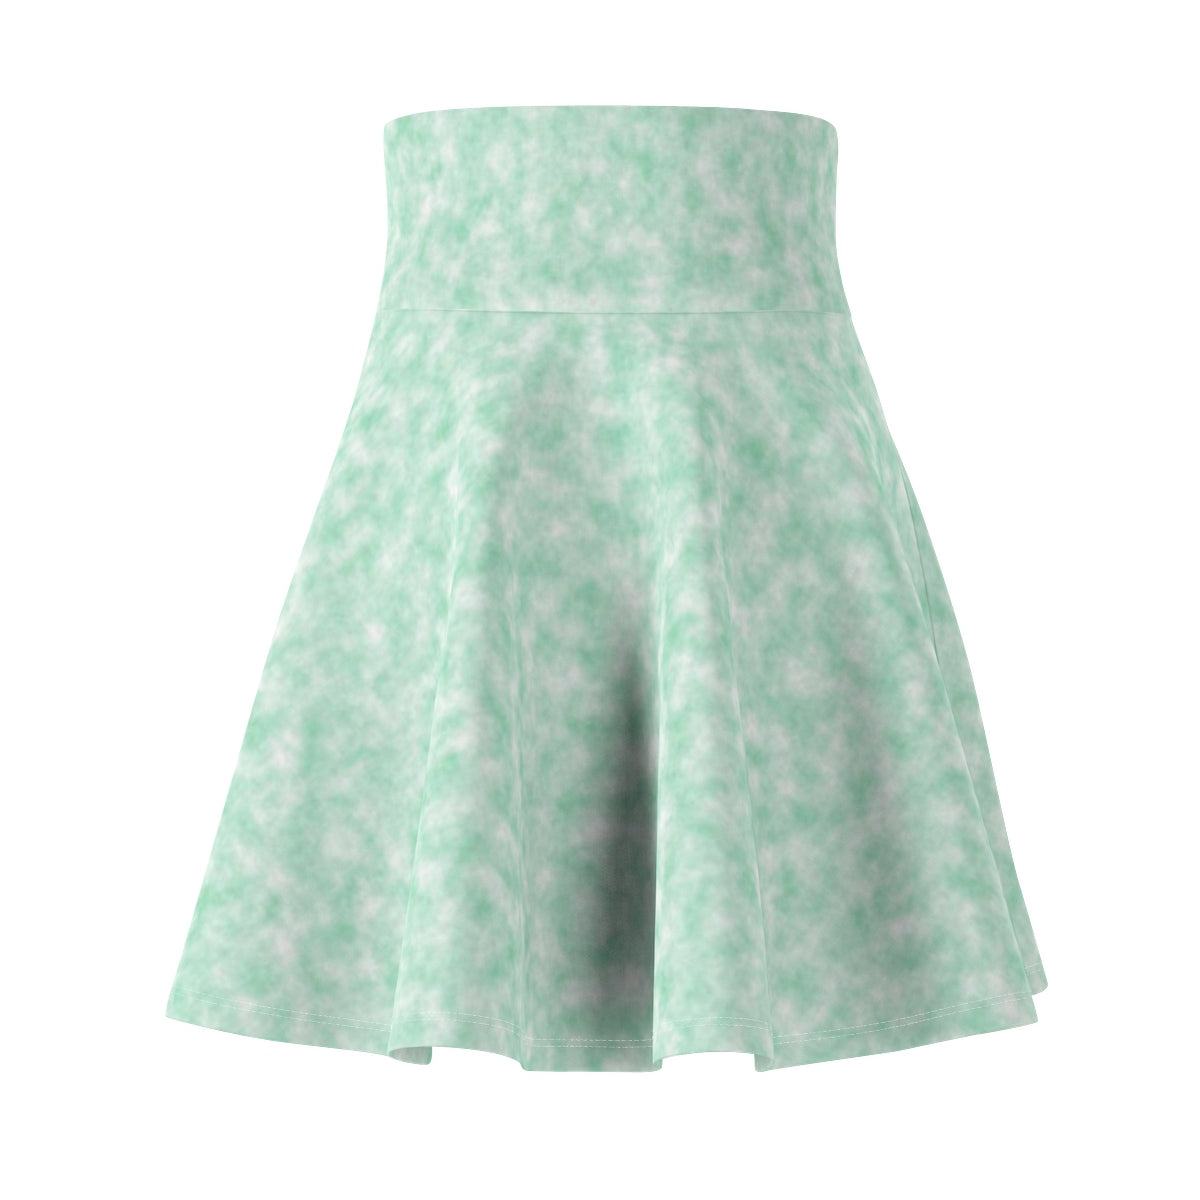 Seafoam Green and White Clouds Skater Skirt